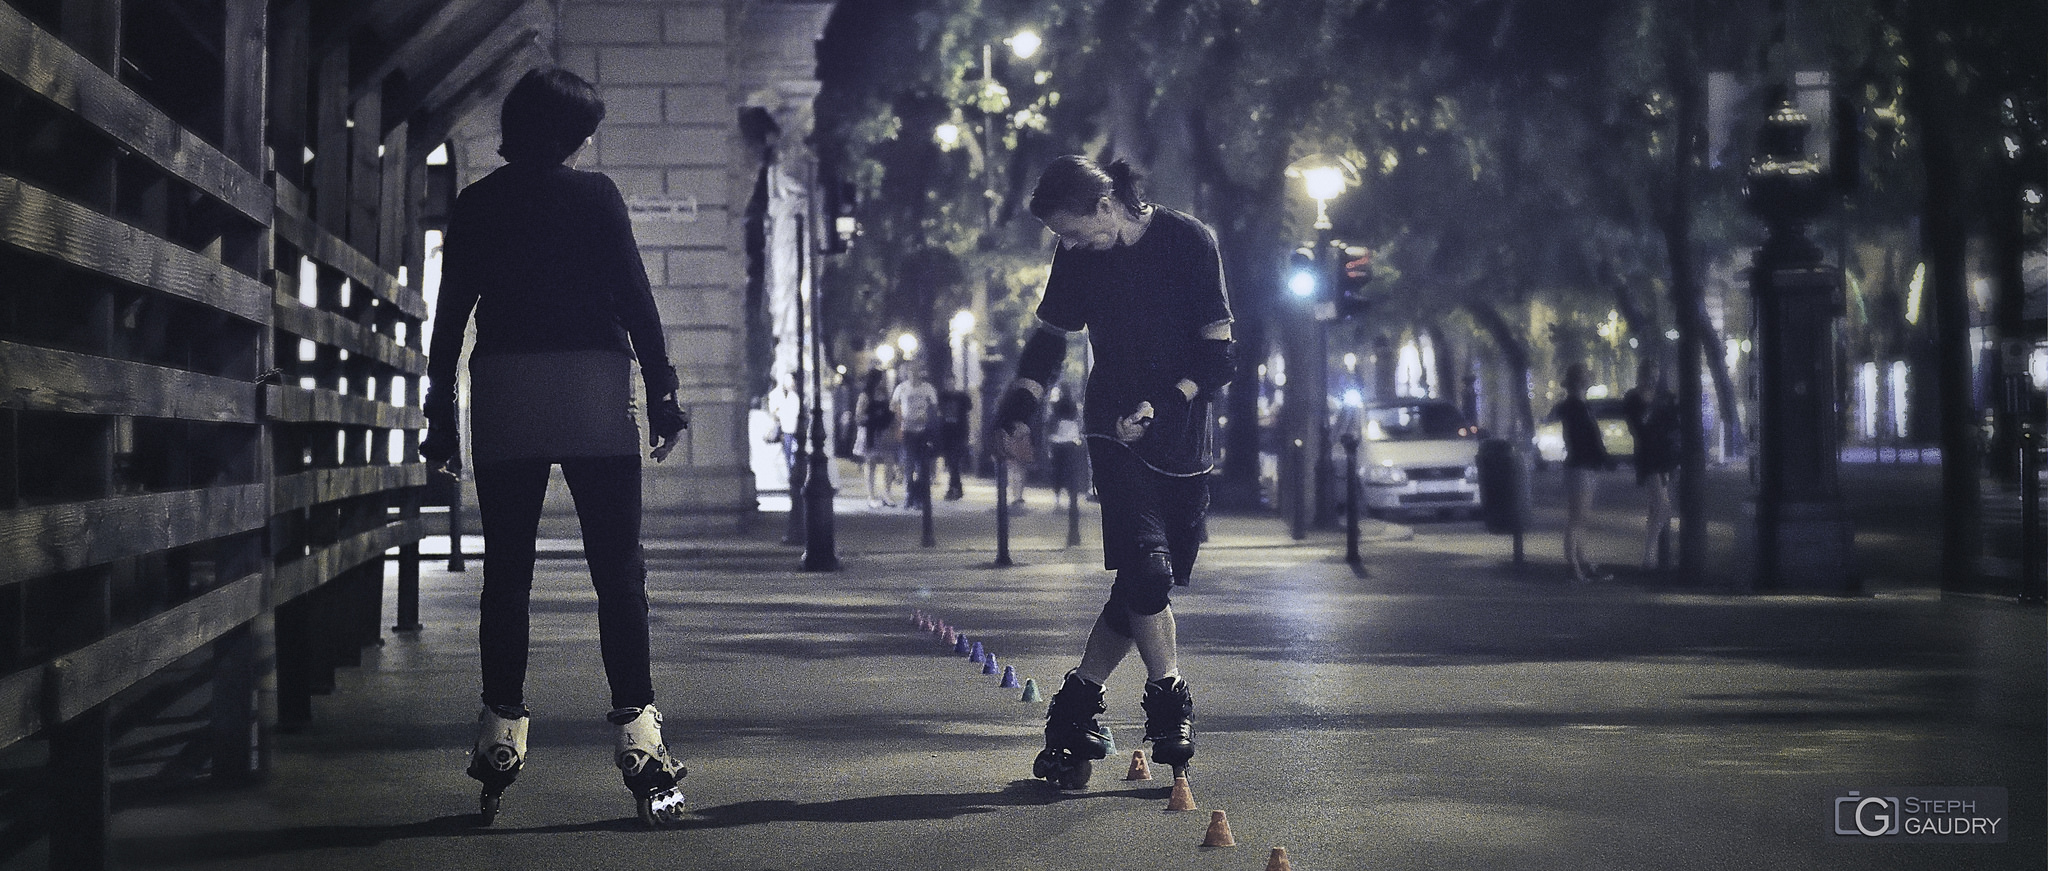 Skating in the streets of Budapest at night